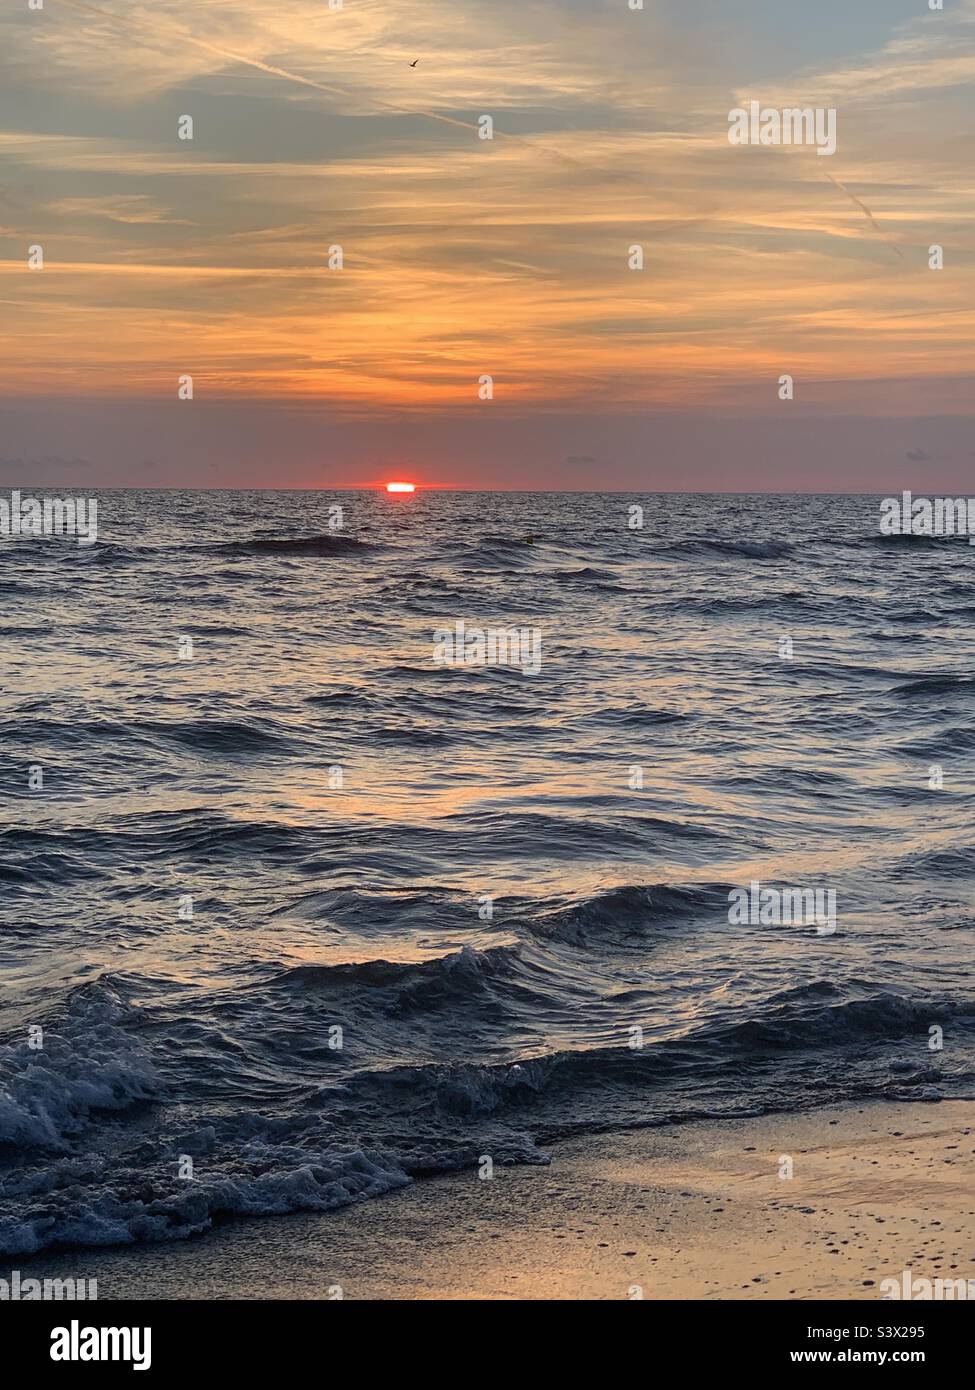 The Sun goes down in the sea creating shades of colors giving unique feelings and internal peace. Stock Photo